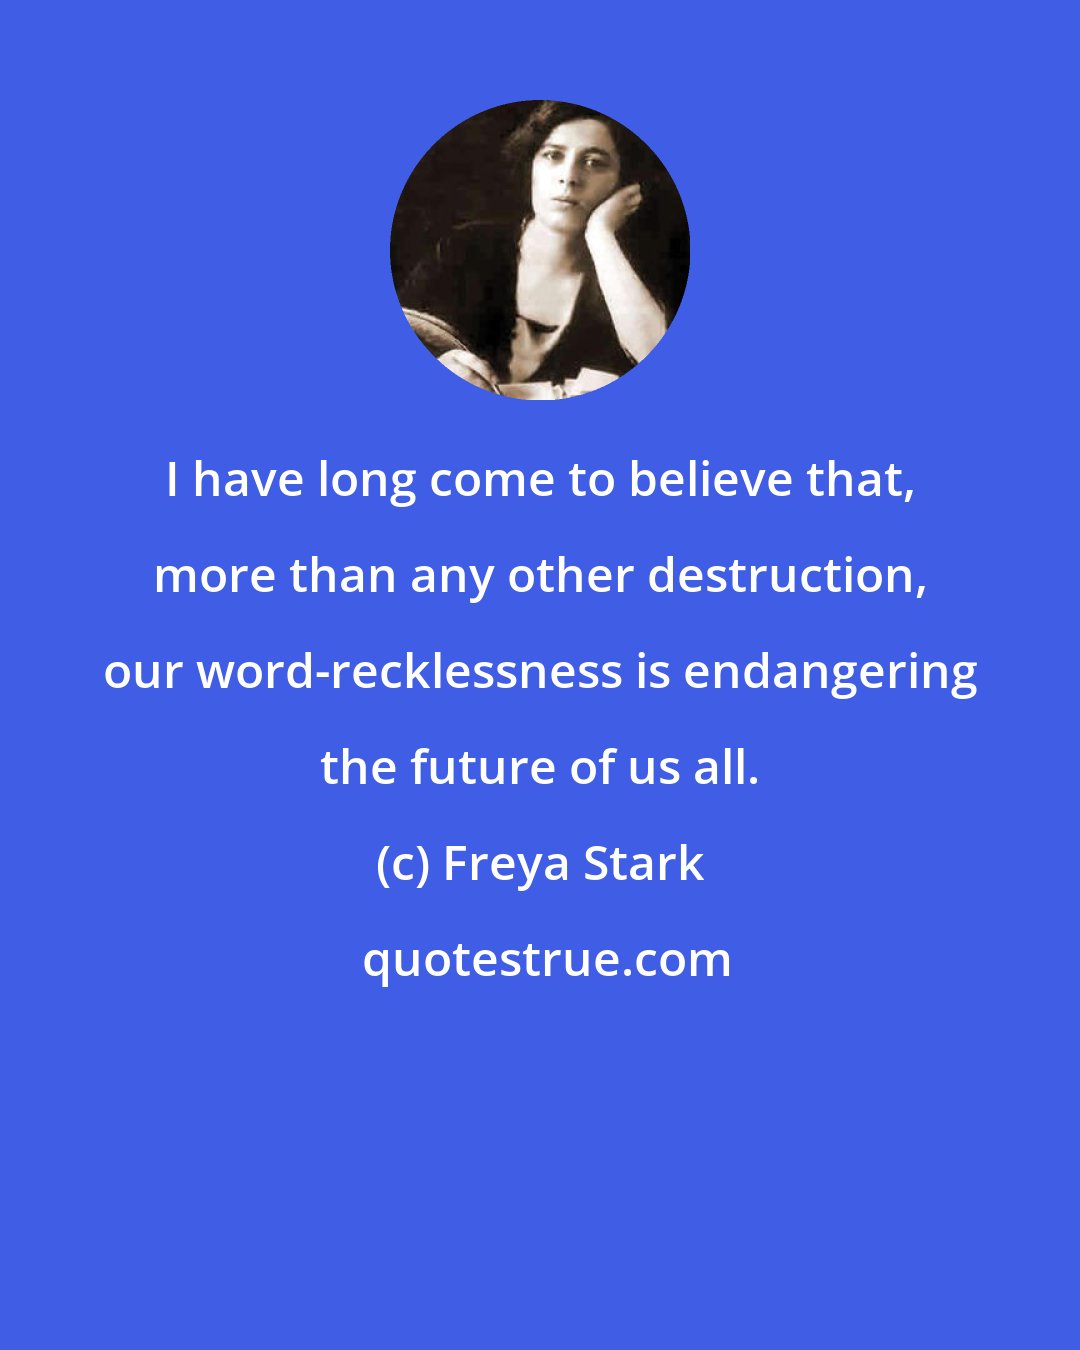 Freya Stark: I have long come to believe that, more than any other destruction, our word-recklessness is endangering the future of us all.